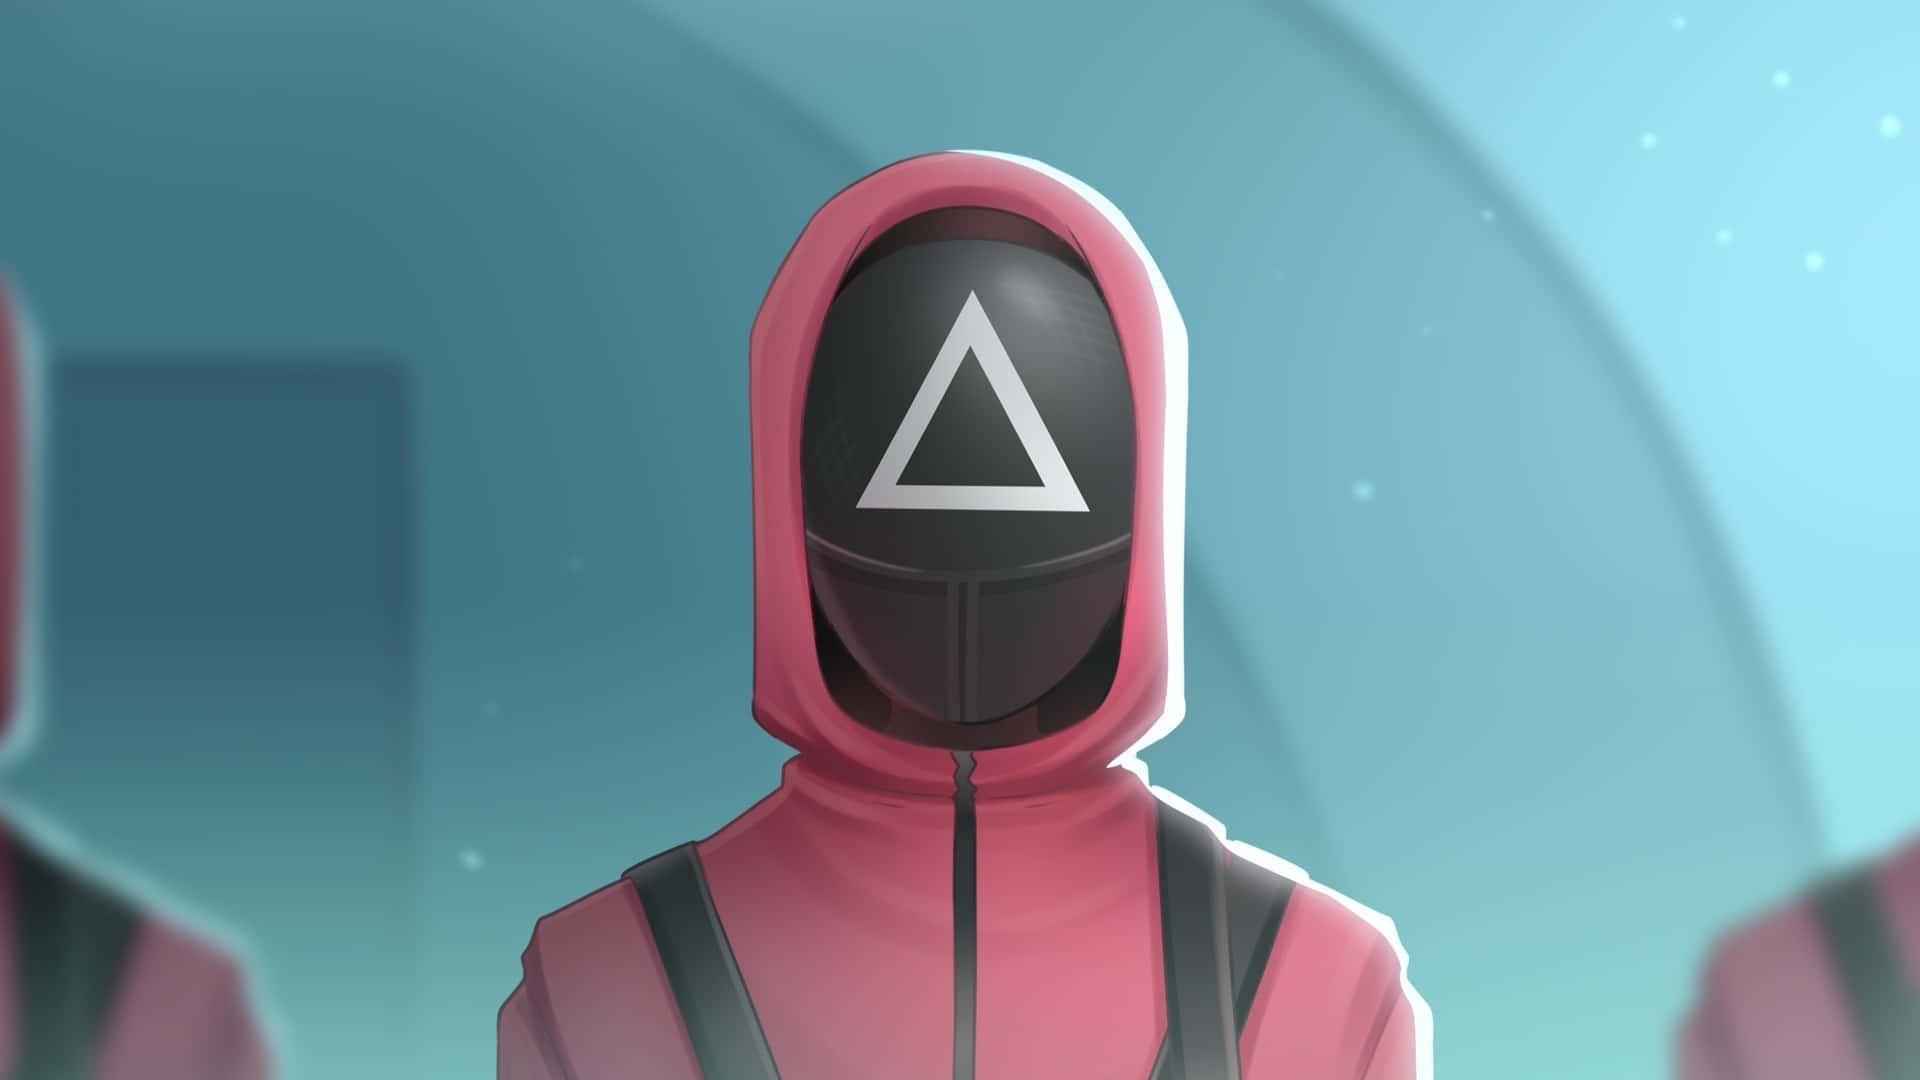 A Pink Hooded Man With A Triangle On His Head